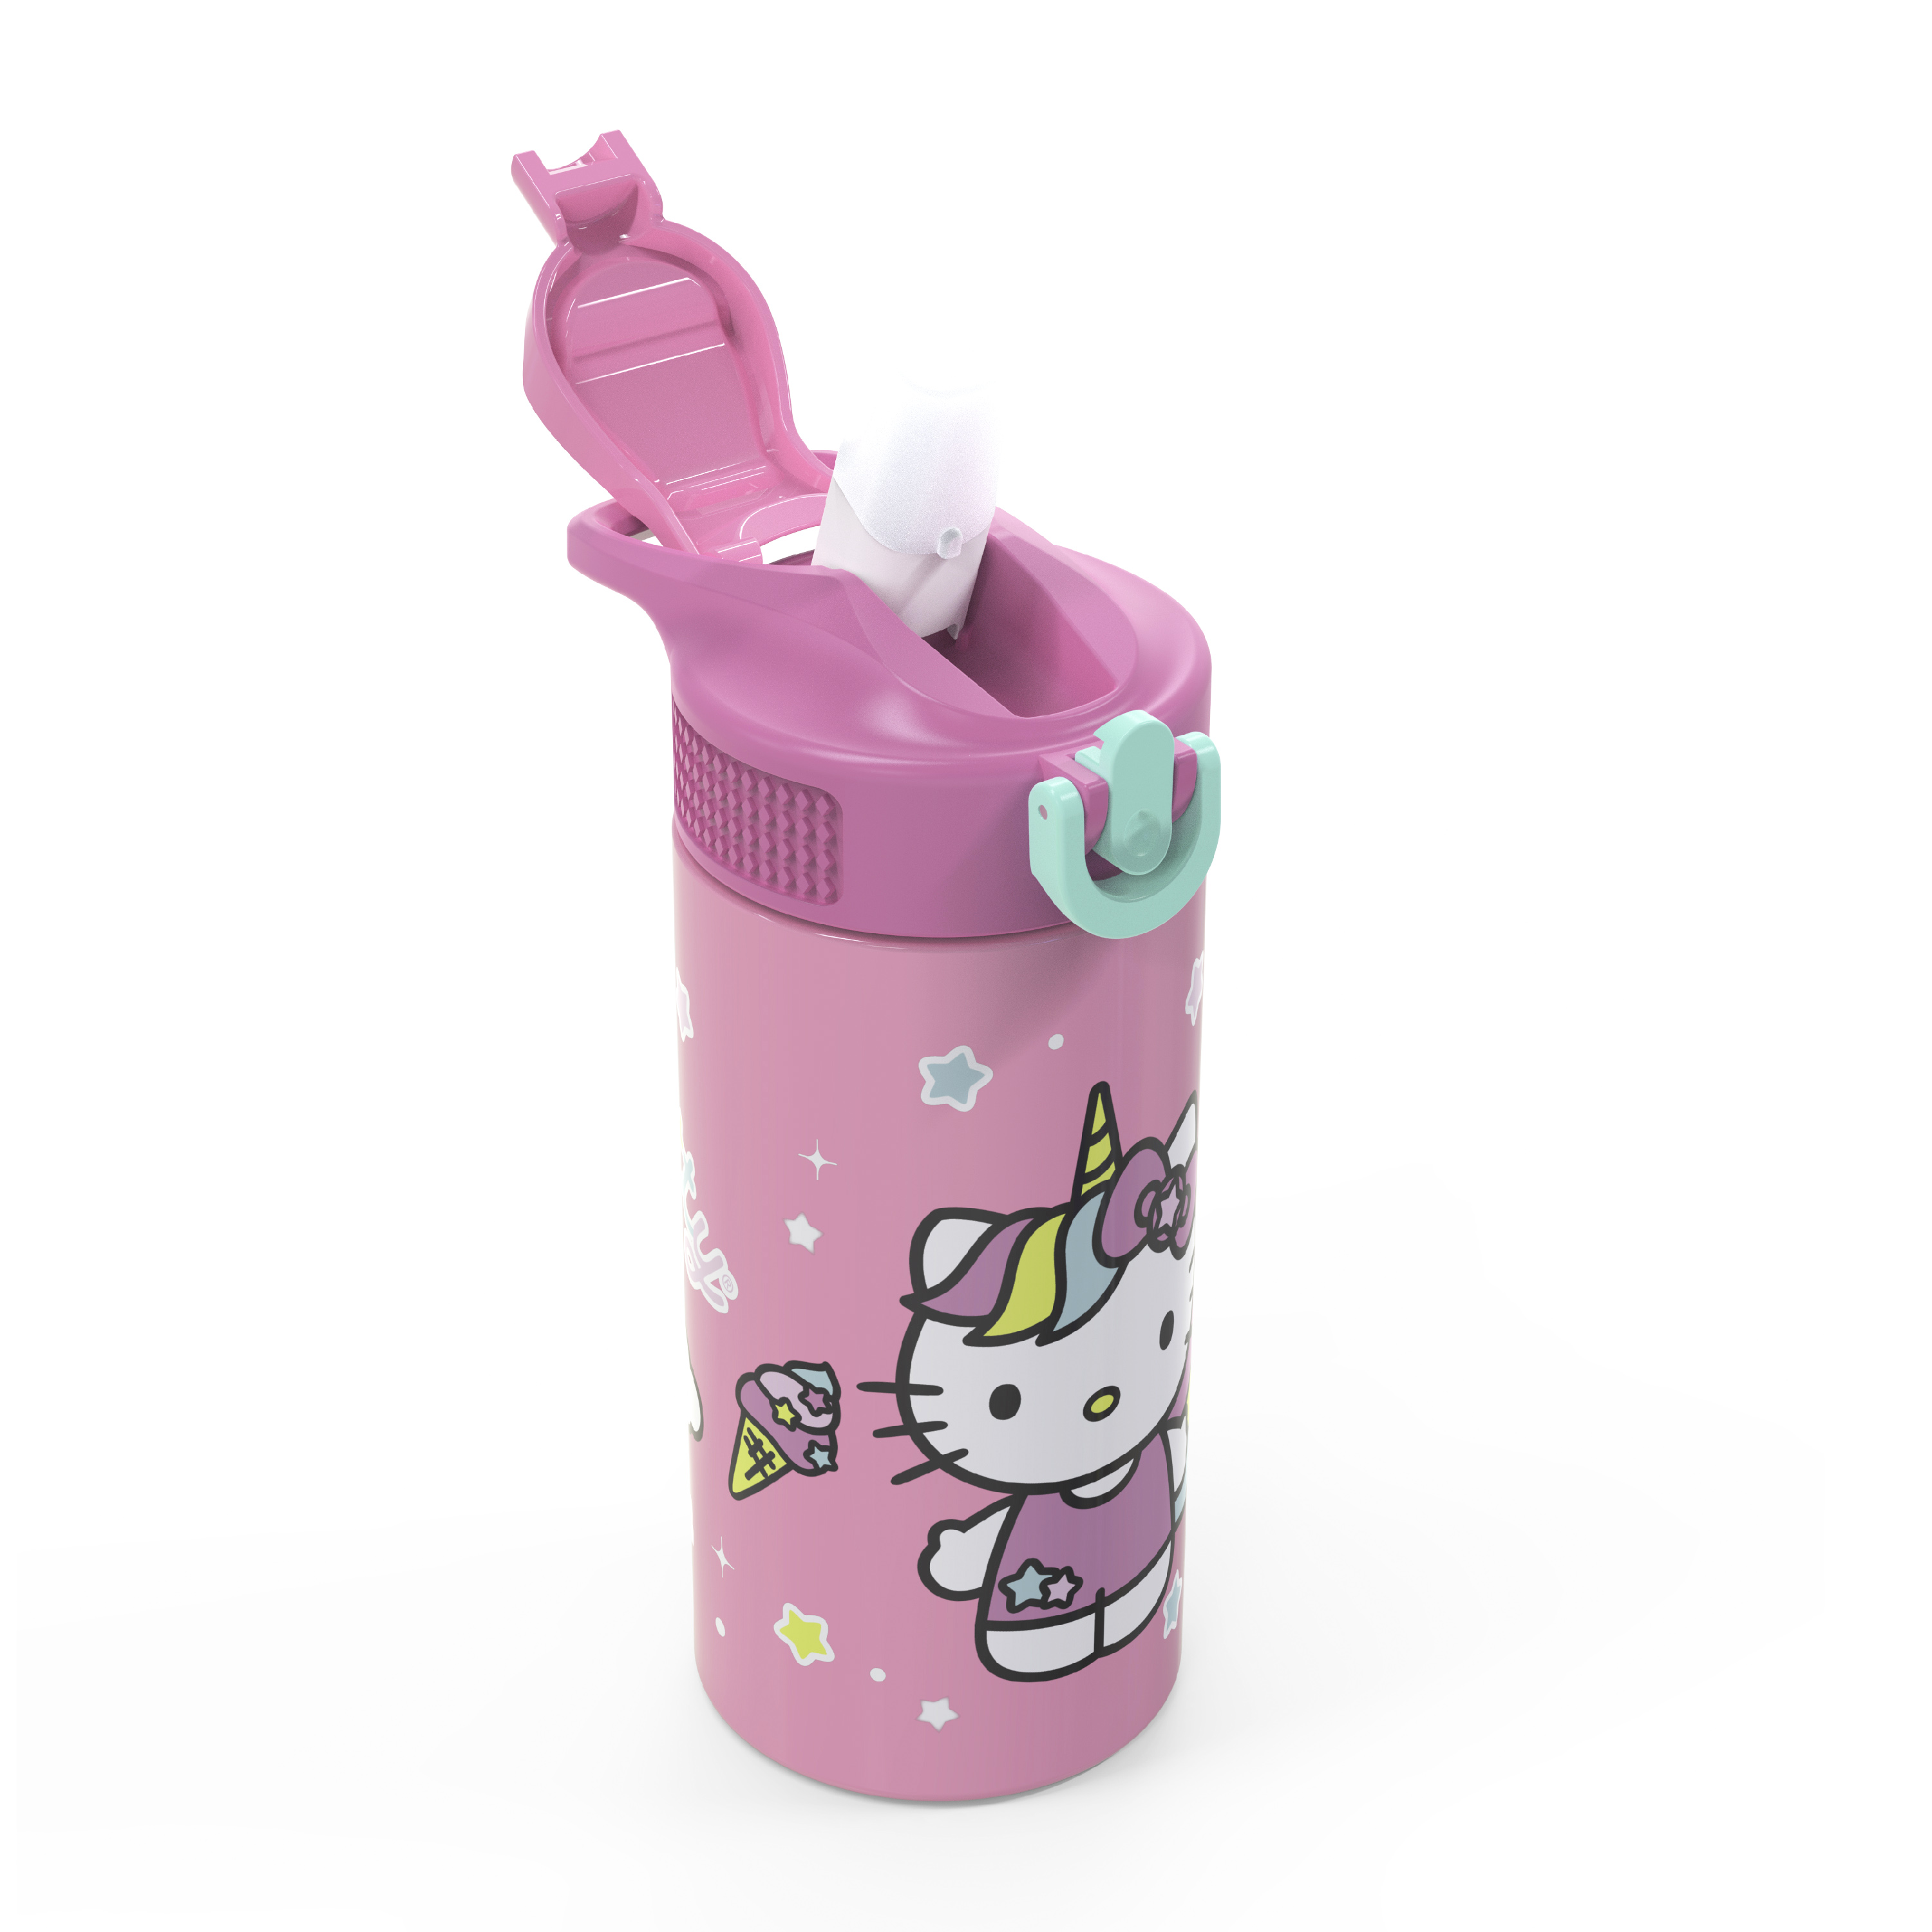 Sanrio 14 ounce Stainless Steel Vacuum Insulated Water Bottle, Hello Kitty slideshow image 4